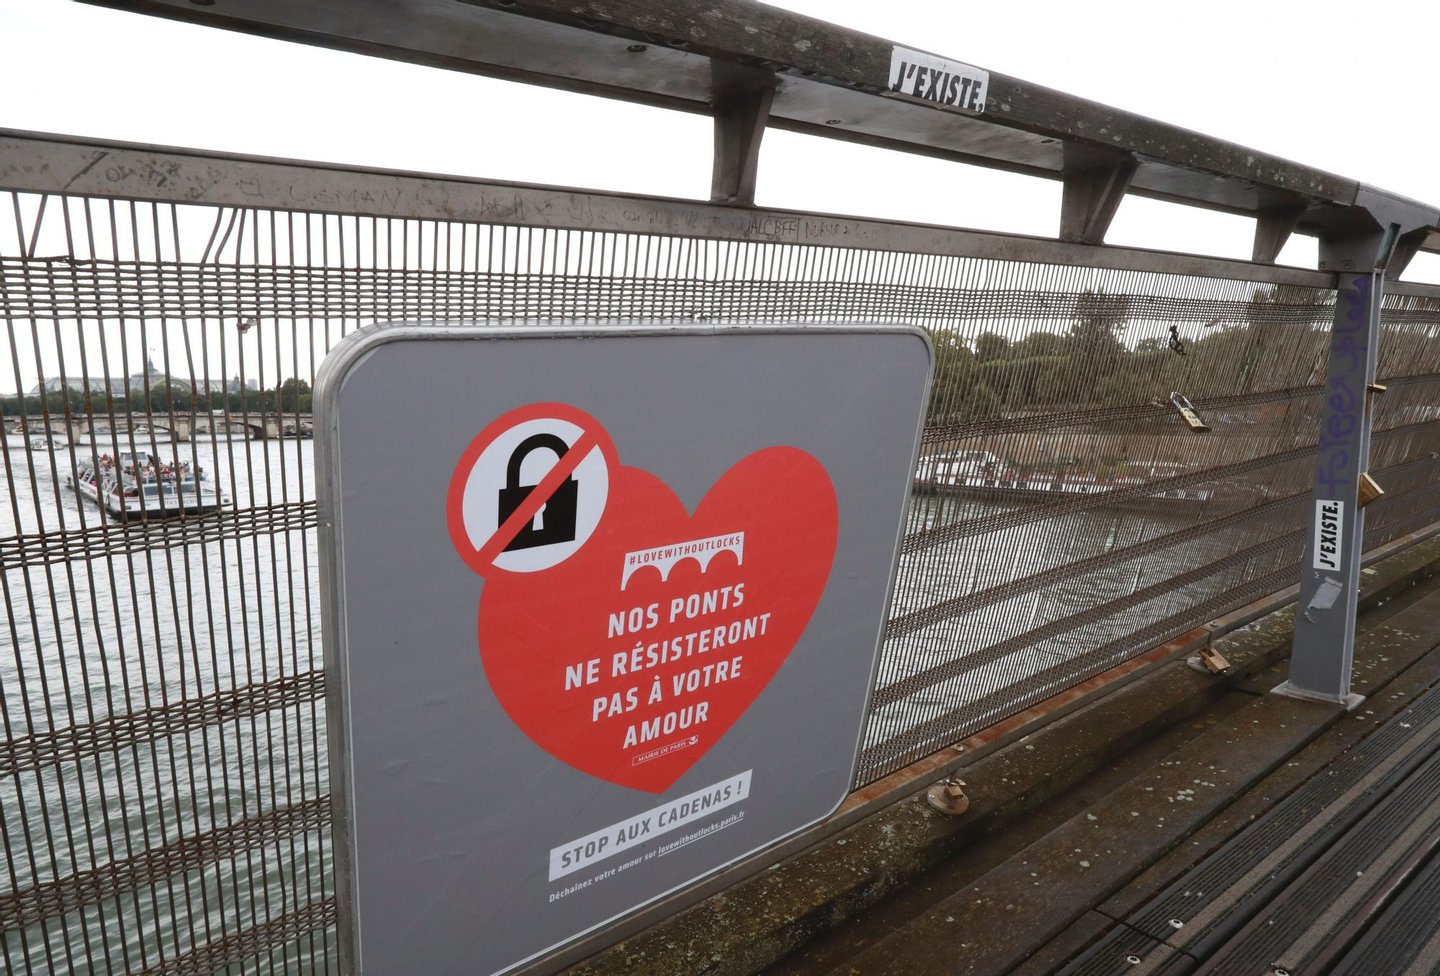 A placard reading "our bridges won't resist your love" is seen on the footbridge of Leopold-Sedar-Senghor in Paris, on August 4, 2016. Love may know no bounds, but Paris intends to instill some: authorities are going to take a tougher line with swooning couples attaching "love-locks" to city bridges as a sign of their undying devotion. In June last year authorities removed hundreds of thousands of such padlocks from the city bridges, notably the Pont des Arts which had a section collapse under the weight of the locks. / AFP / JACQUES DEMARTHON (Photo credit should read JACQUES DEMARTHON/AFP/Getty Images)